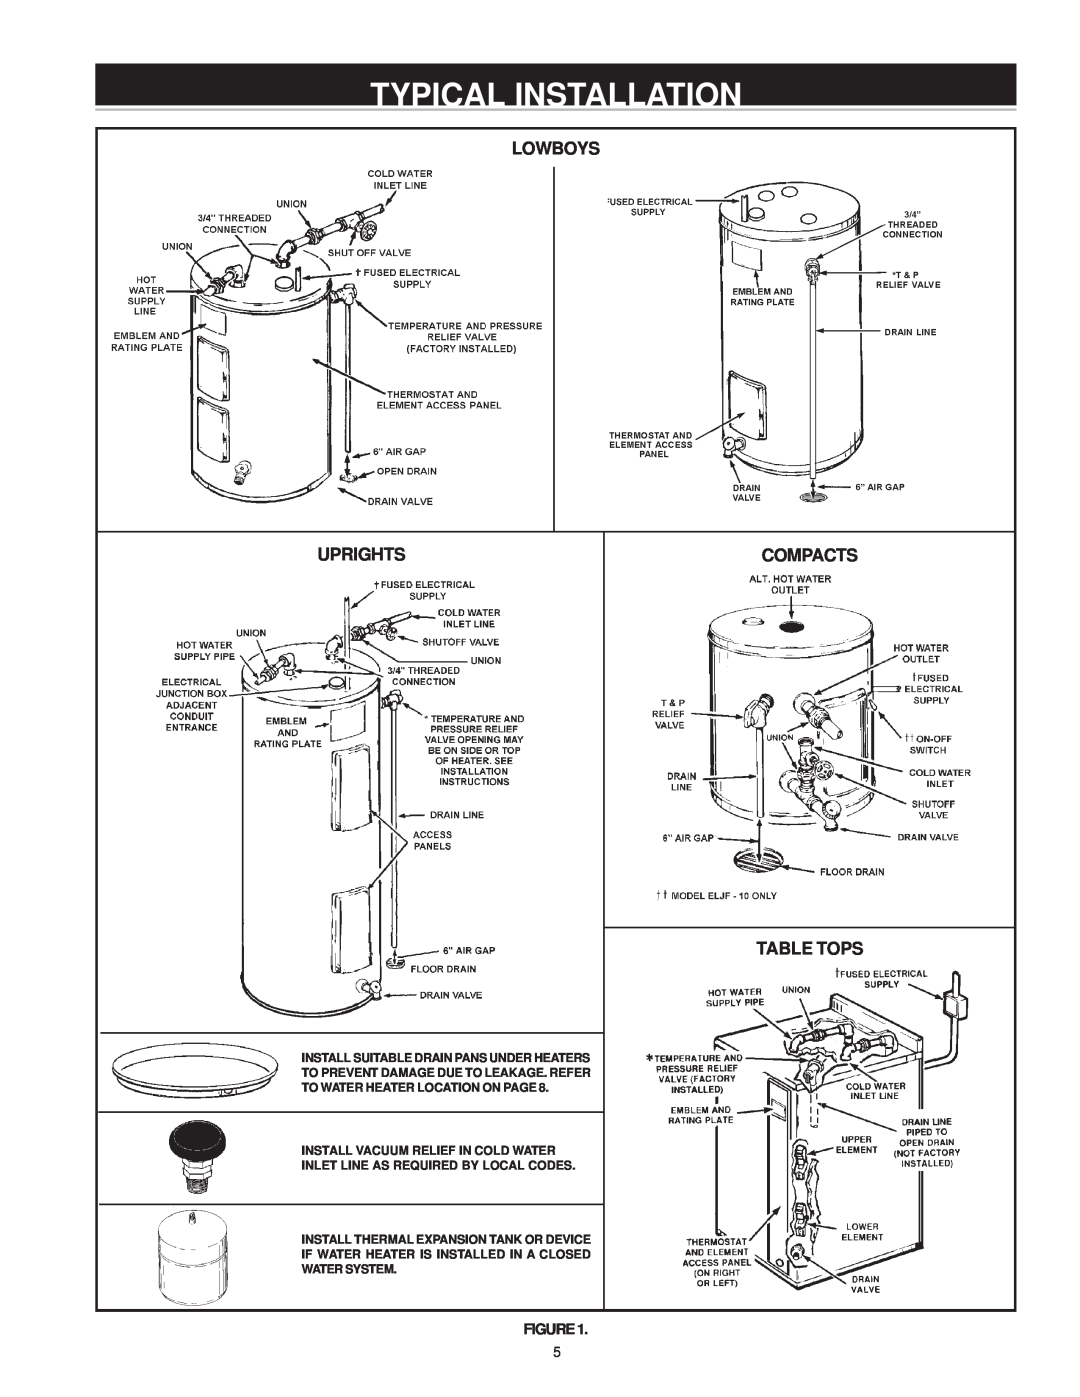 A.O. Smith WATER HEATERS instruction manual Typical Installation, Lowboys, Uprights, Compacts Table Tops 